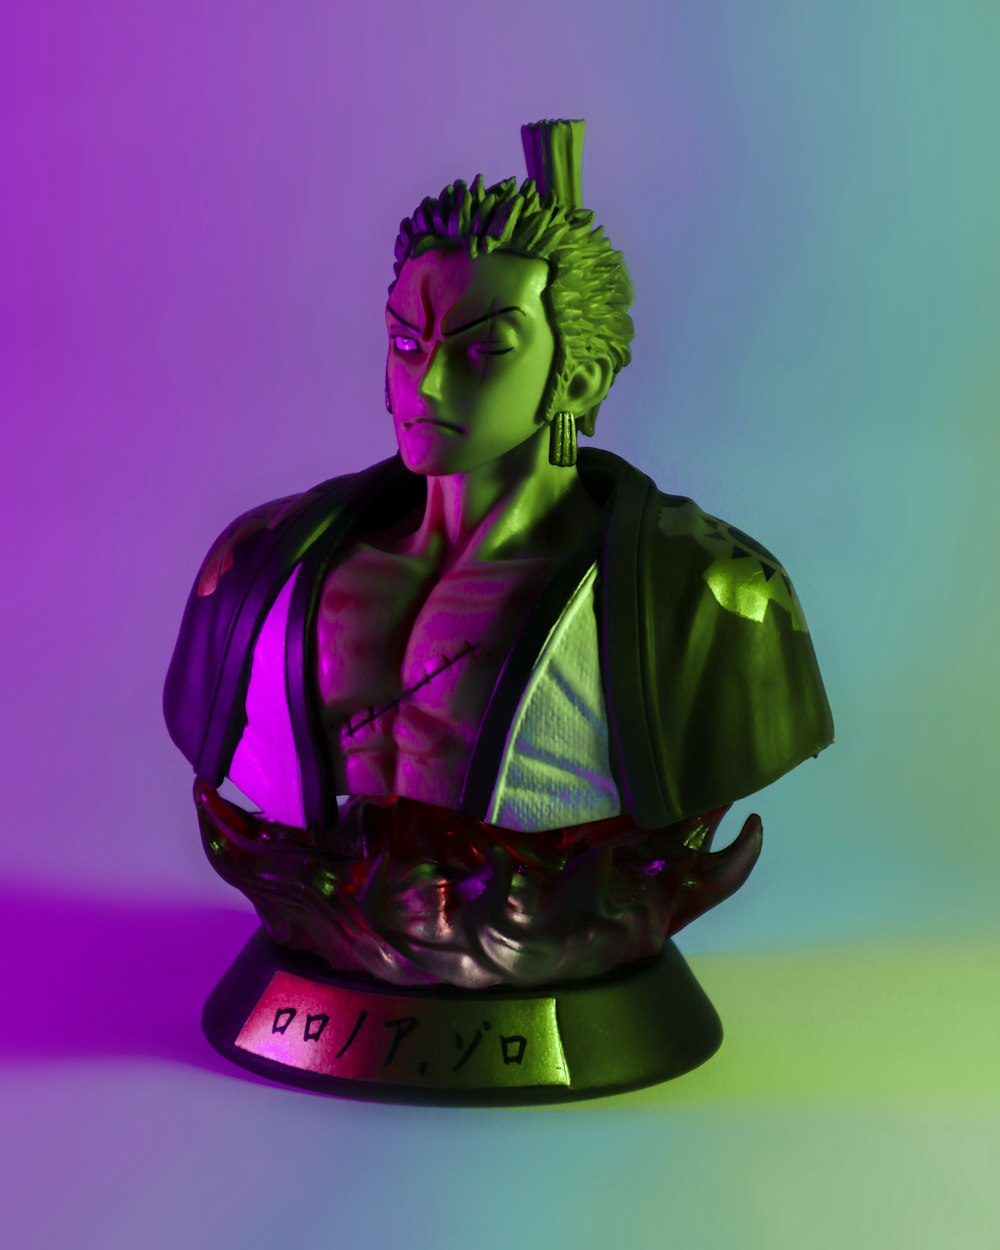 a statue of a man in a purple and green outfit